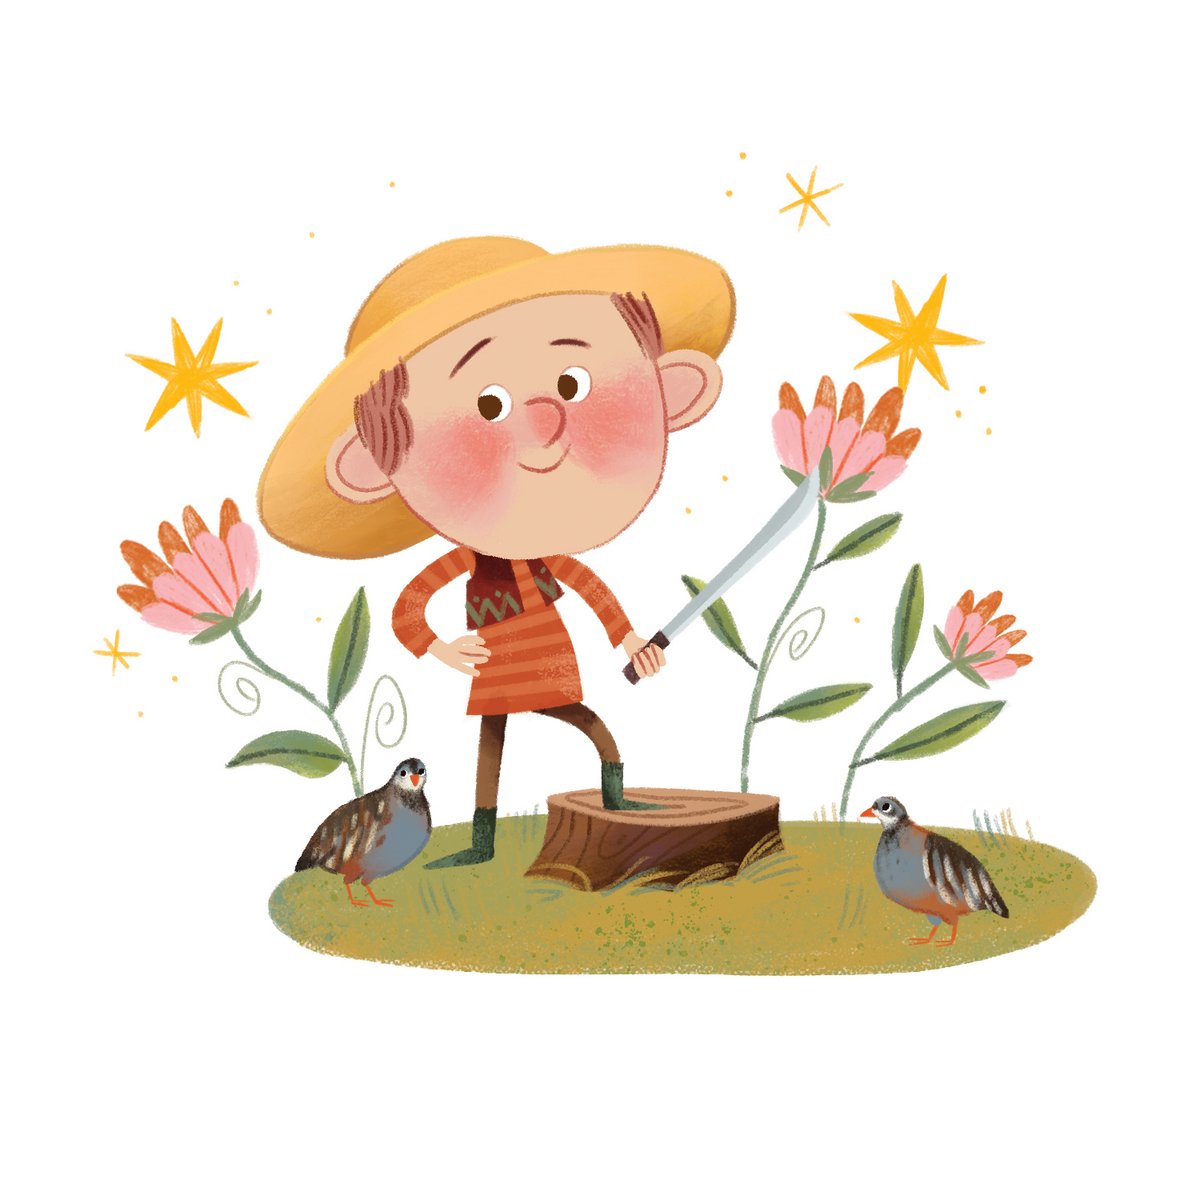 I'd like to share with you a sneak-peek of something new. This is Pedro and I'm really enjoying as never before this process. Have a wonderful day, guys! 🥰 #illustration #draw #digitalillustration #art #PictureBooks